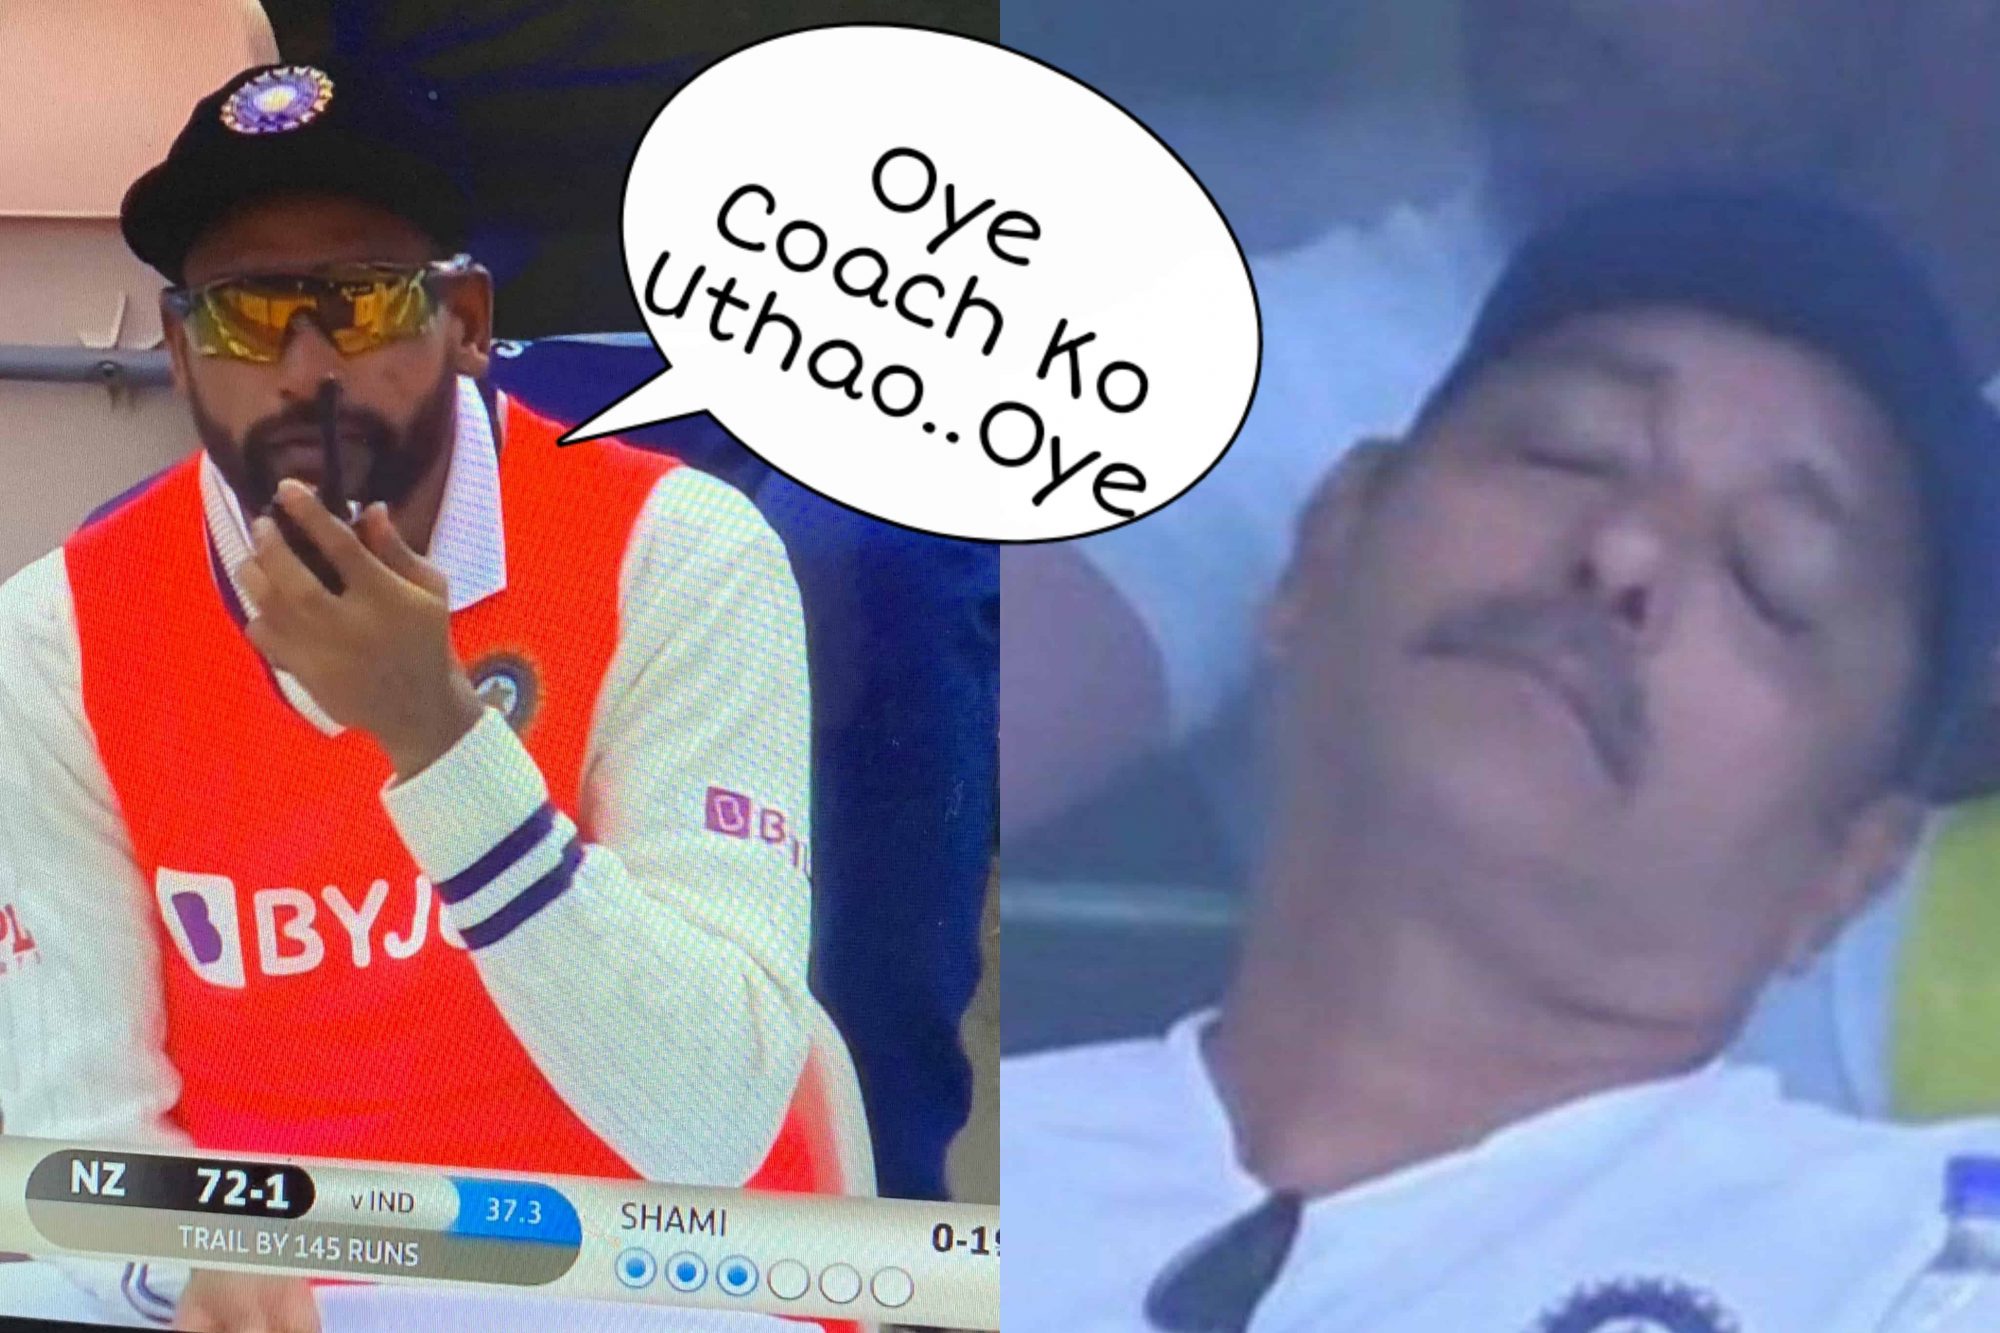 Mohammed Siraj's Viral Photo Of Talking On Walkie Talkie Sparks Hilarious Meme Fest On Twitter - Check Here